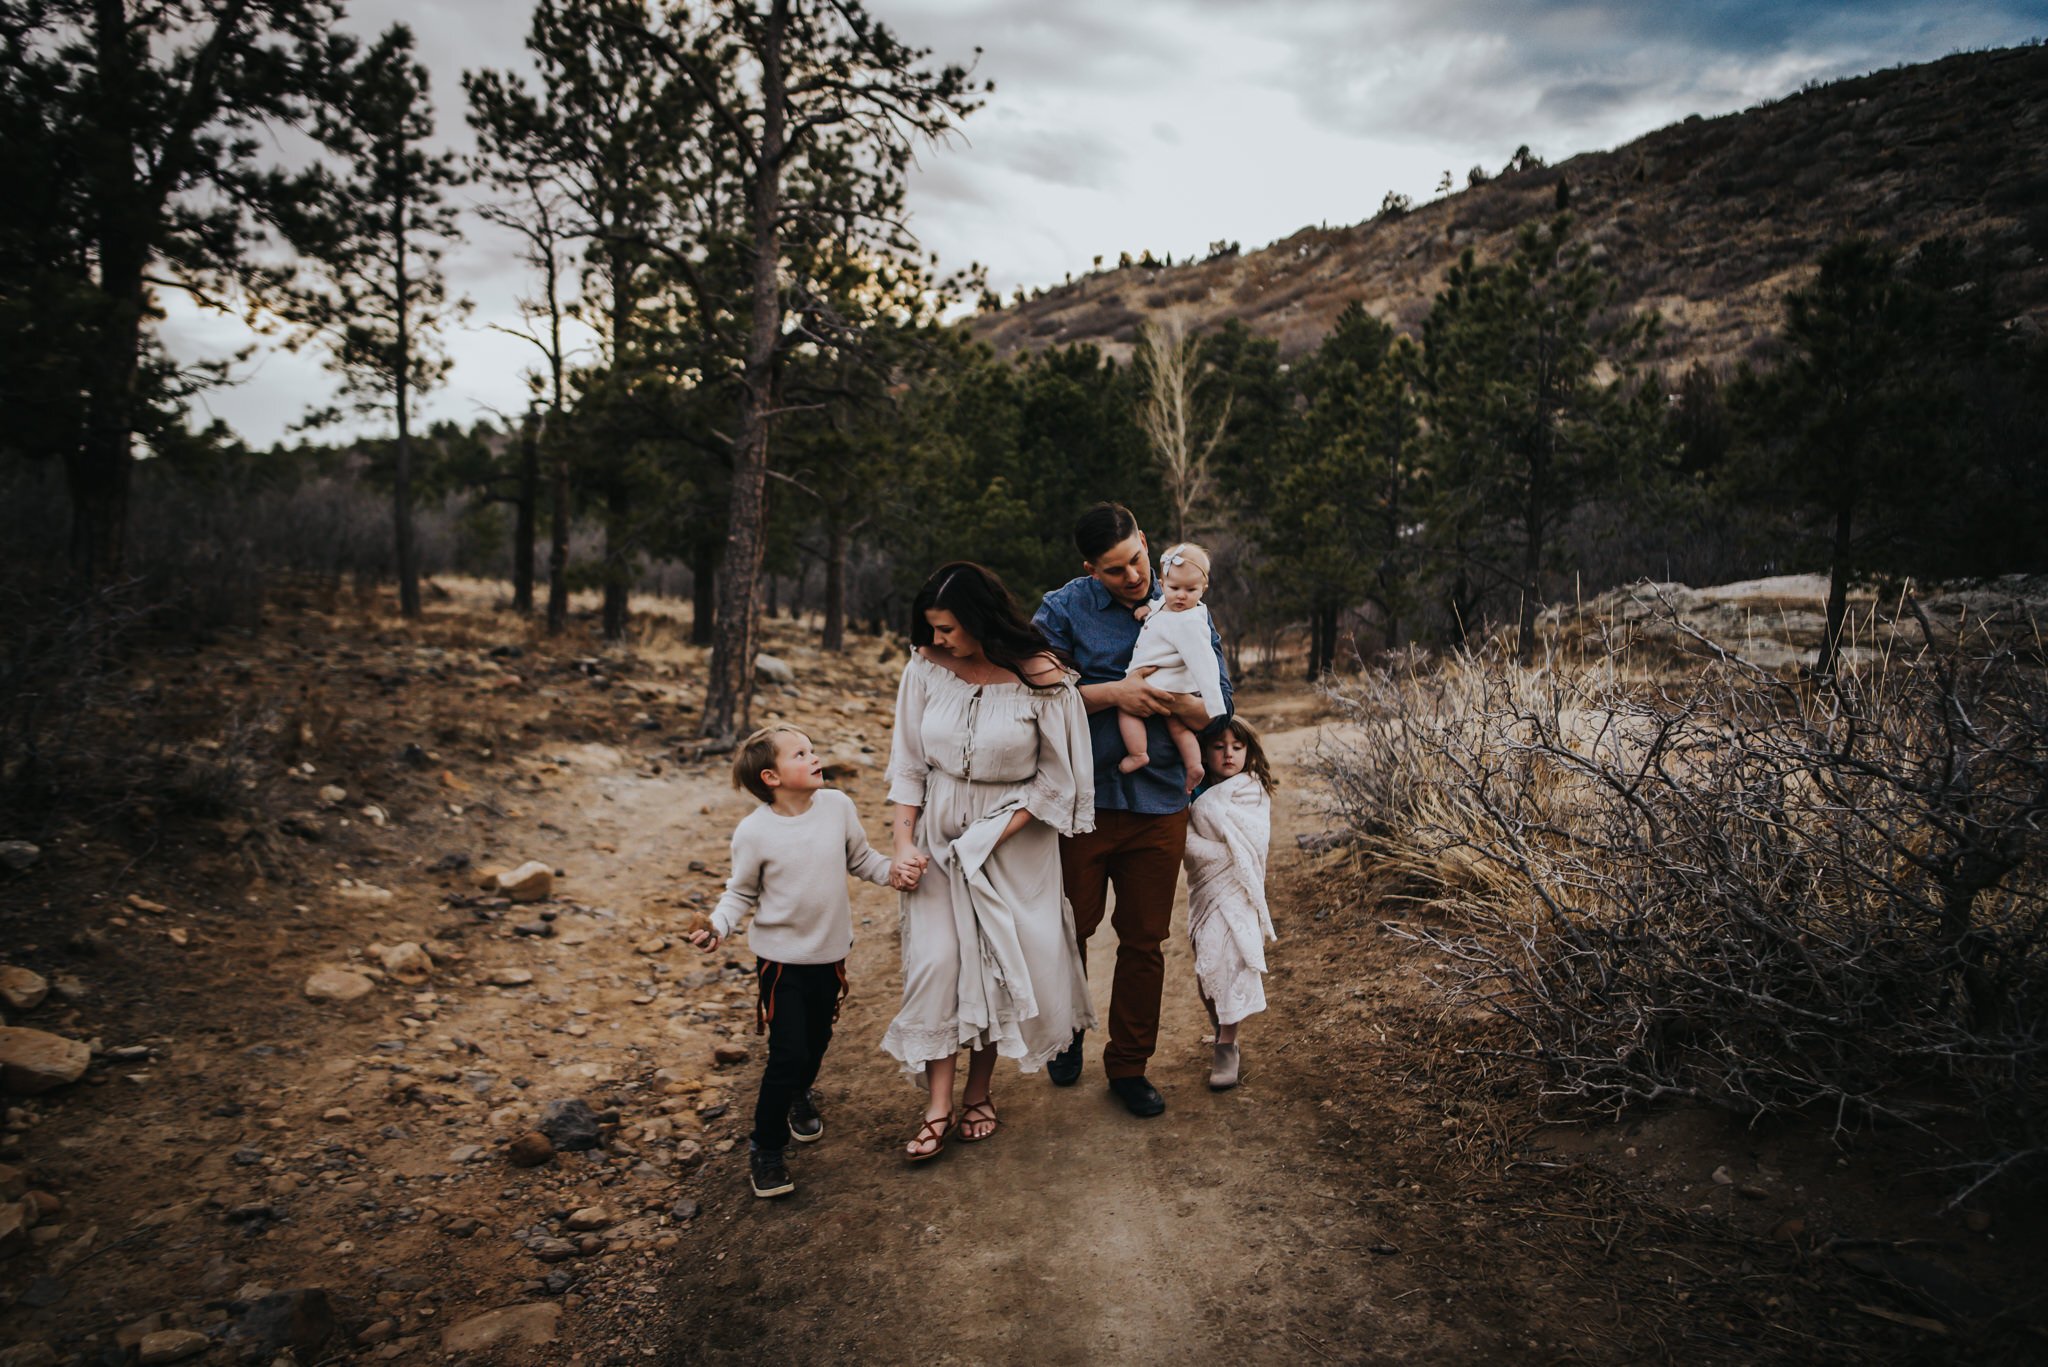 Miller+Family+Session+Mentorship+Colorado+Springs+Colorado+Sunset+Ute+Valley+Park+Mountains+Fields+Mom+Dad+Son+Daughter+Baby+Wild+Prairie+Photography-28-2020.jpeg